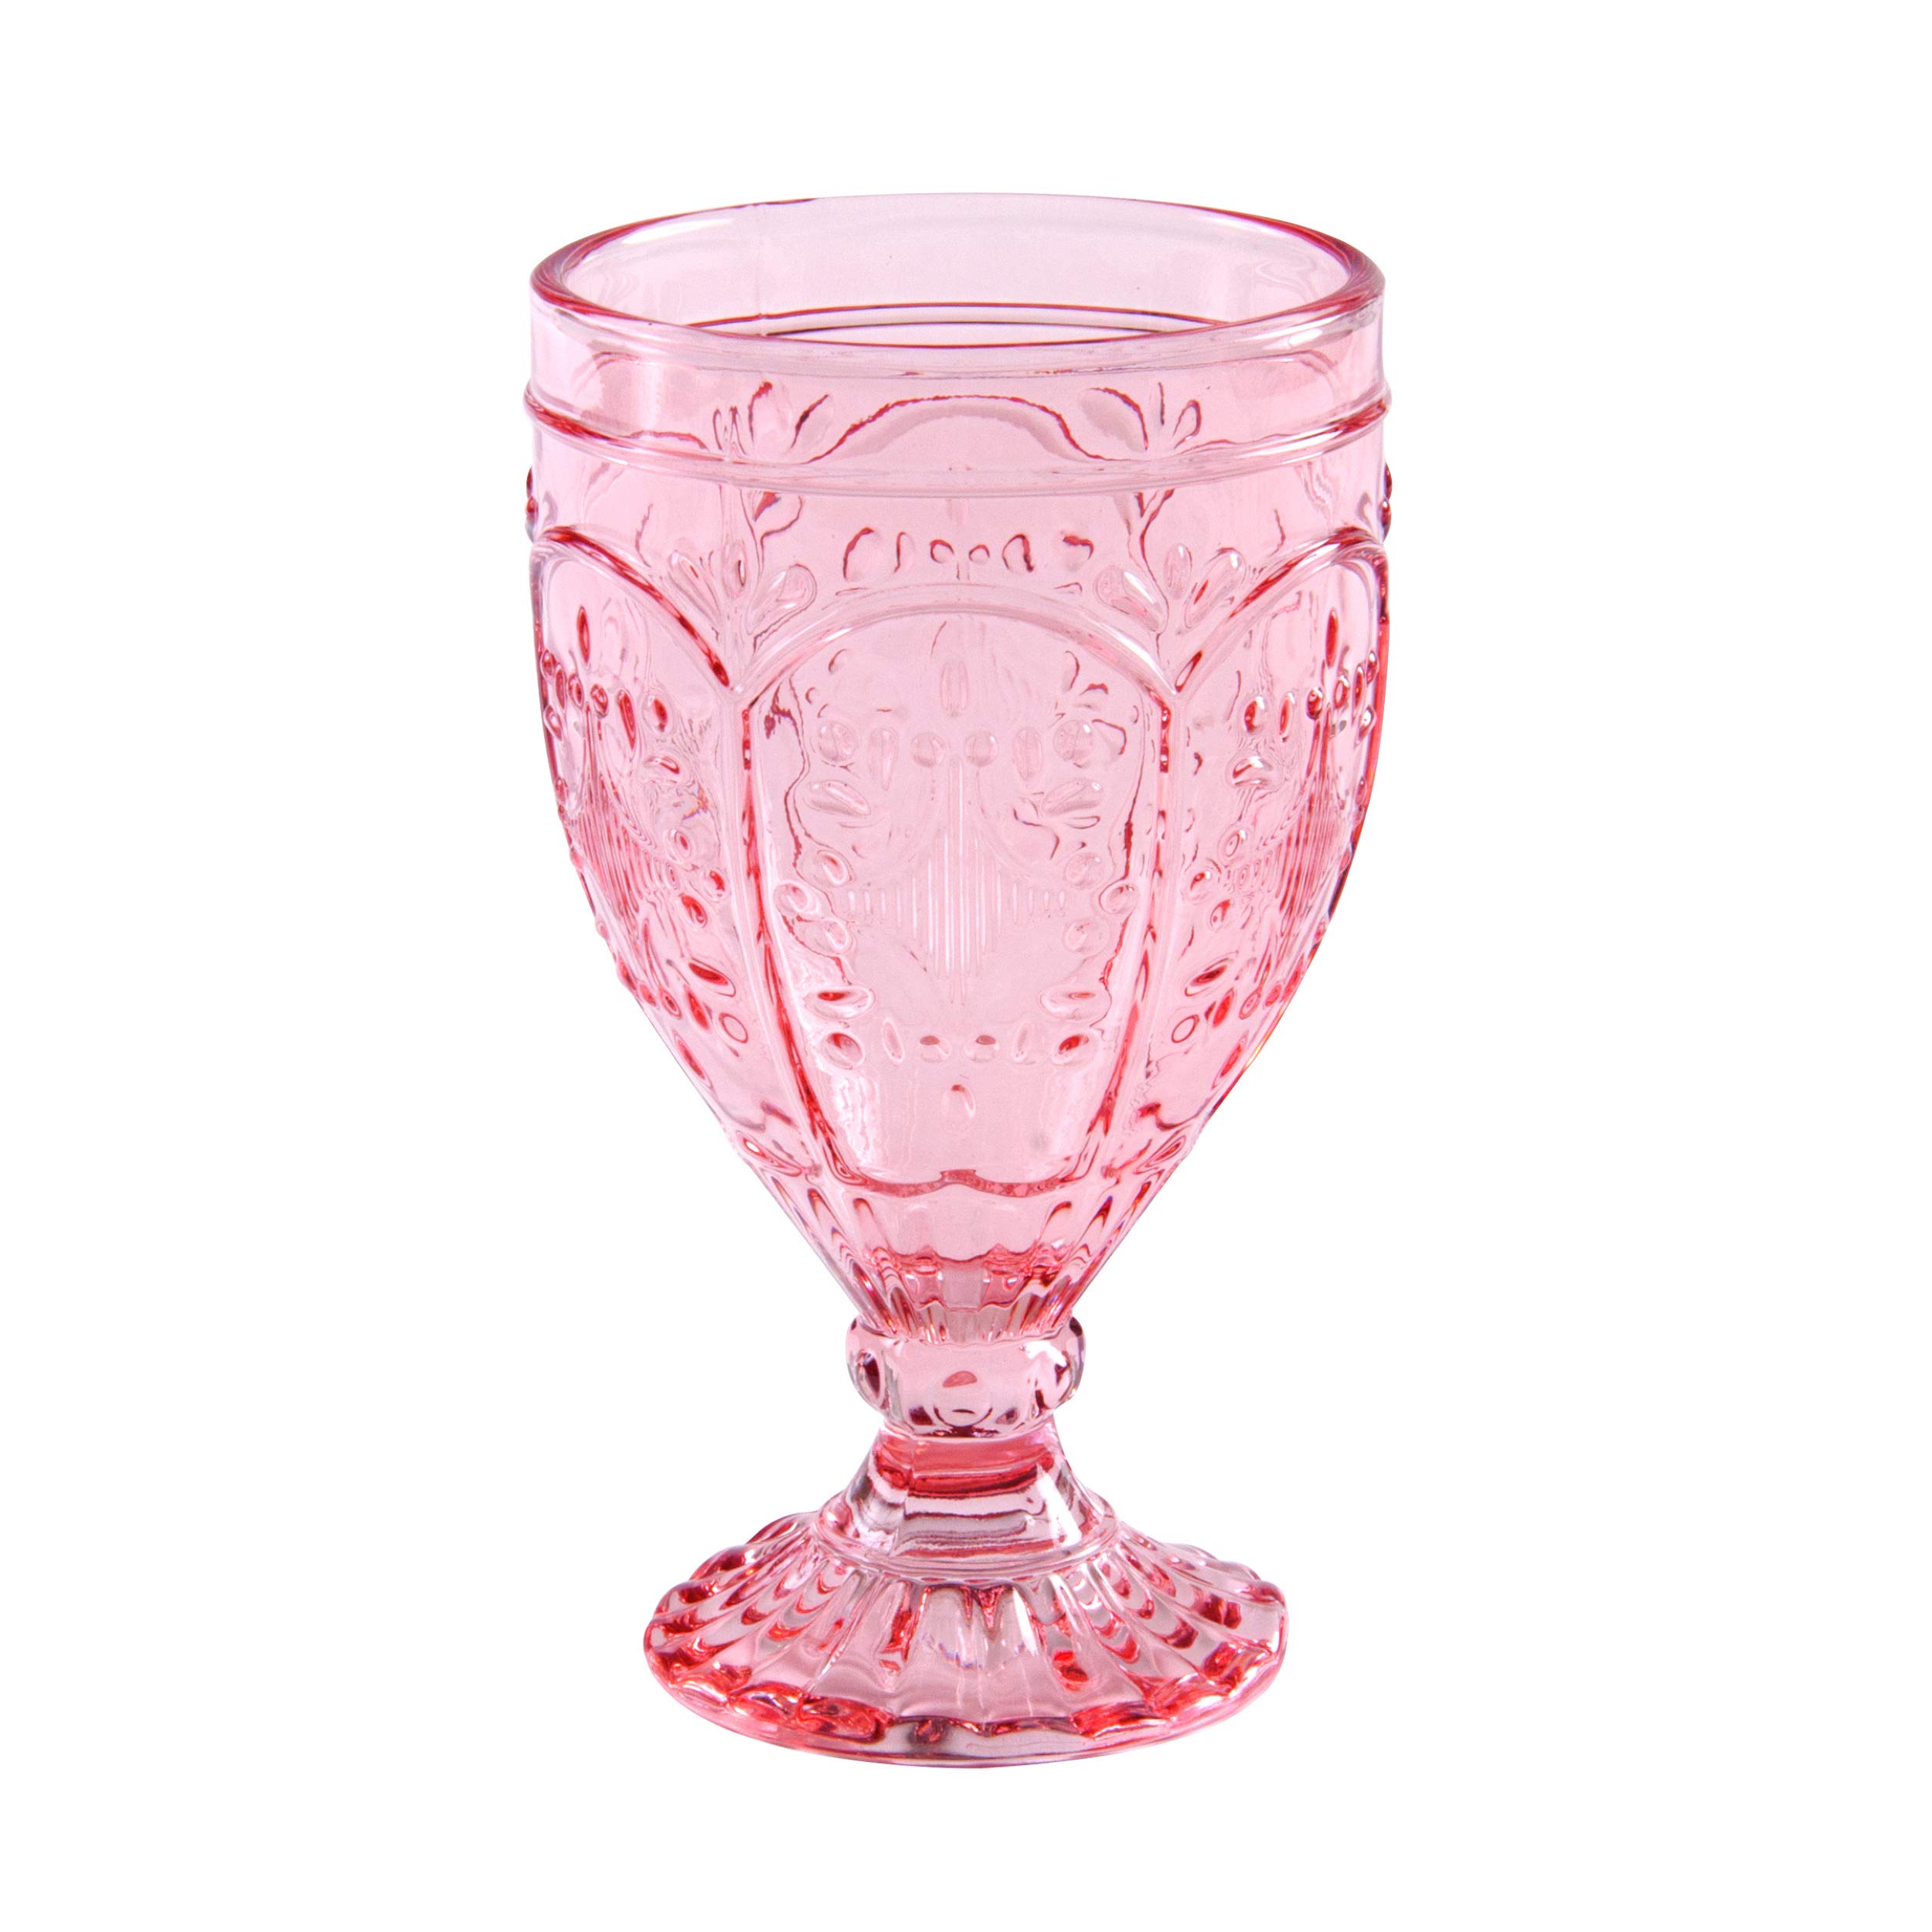 Fitz and Floyd Trestle Goblet, 4 Count (Pack of 1), Blush